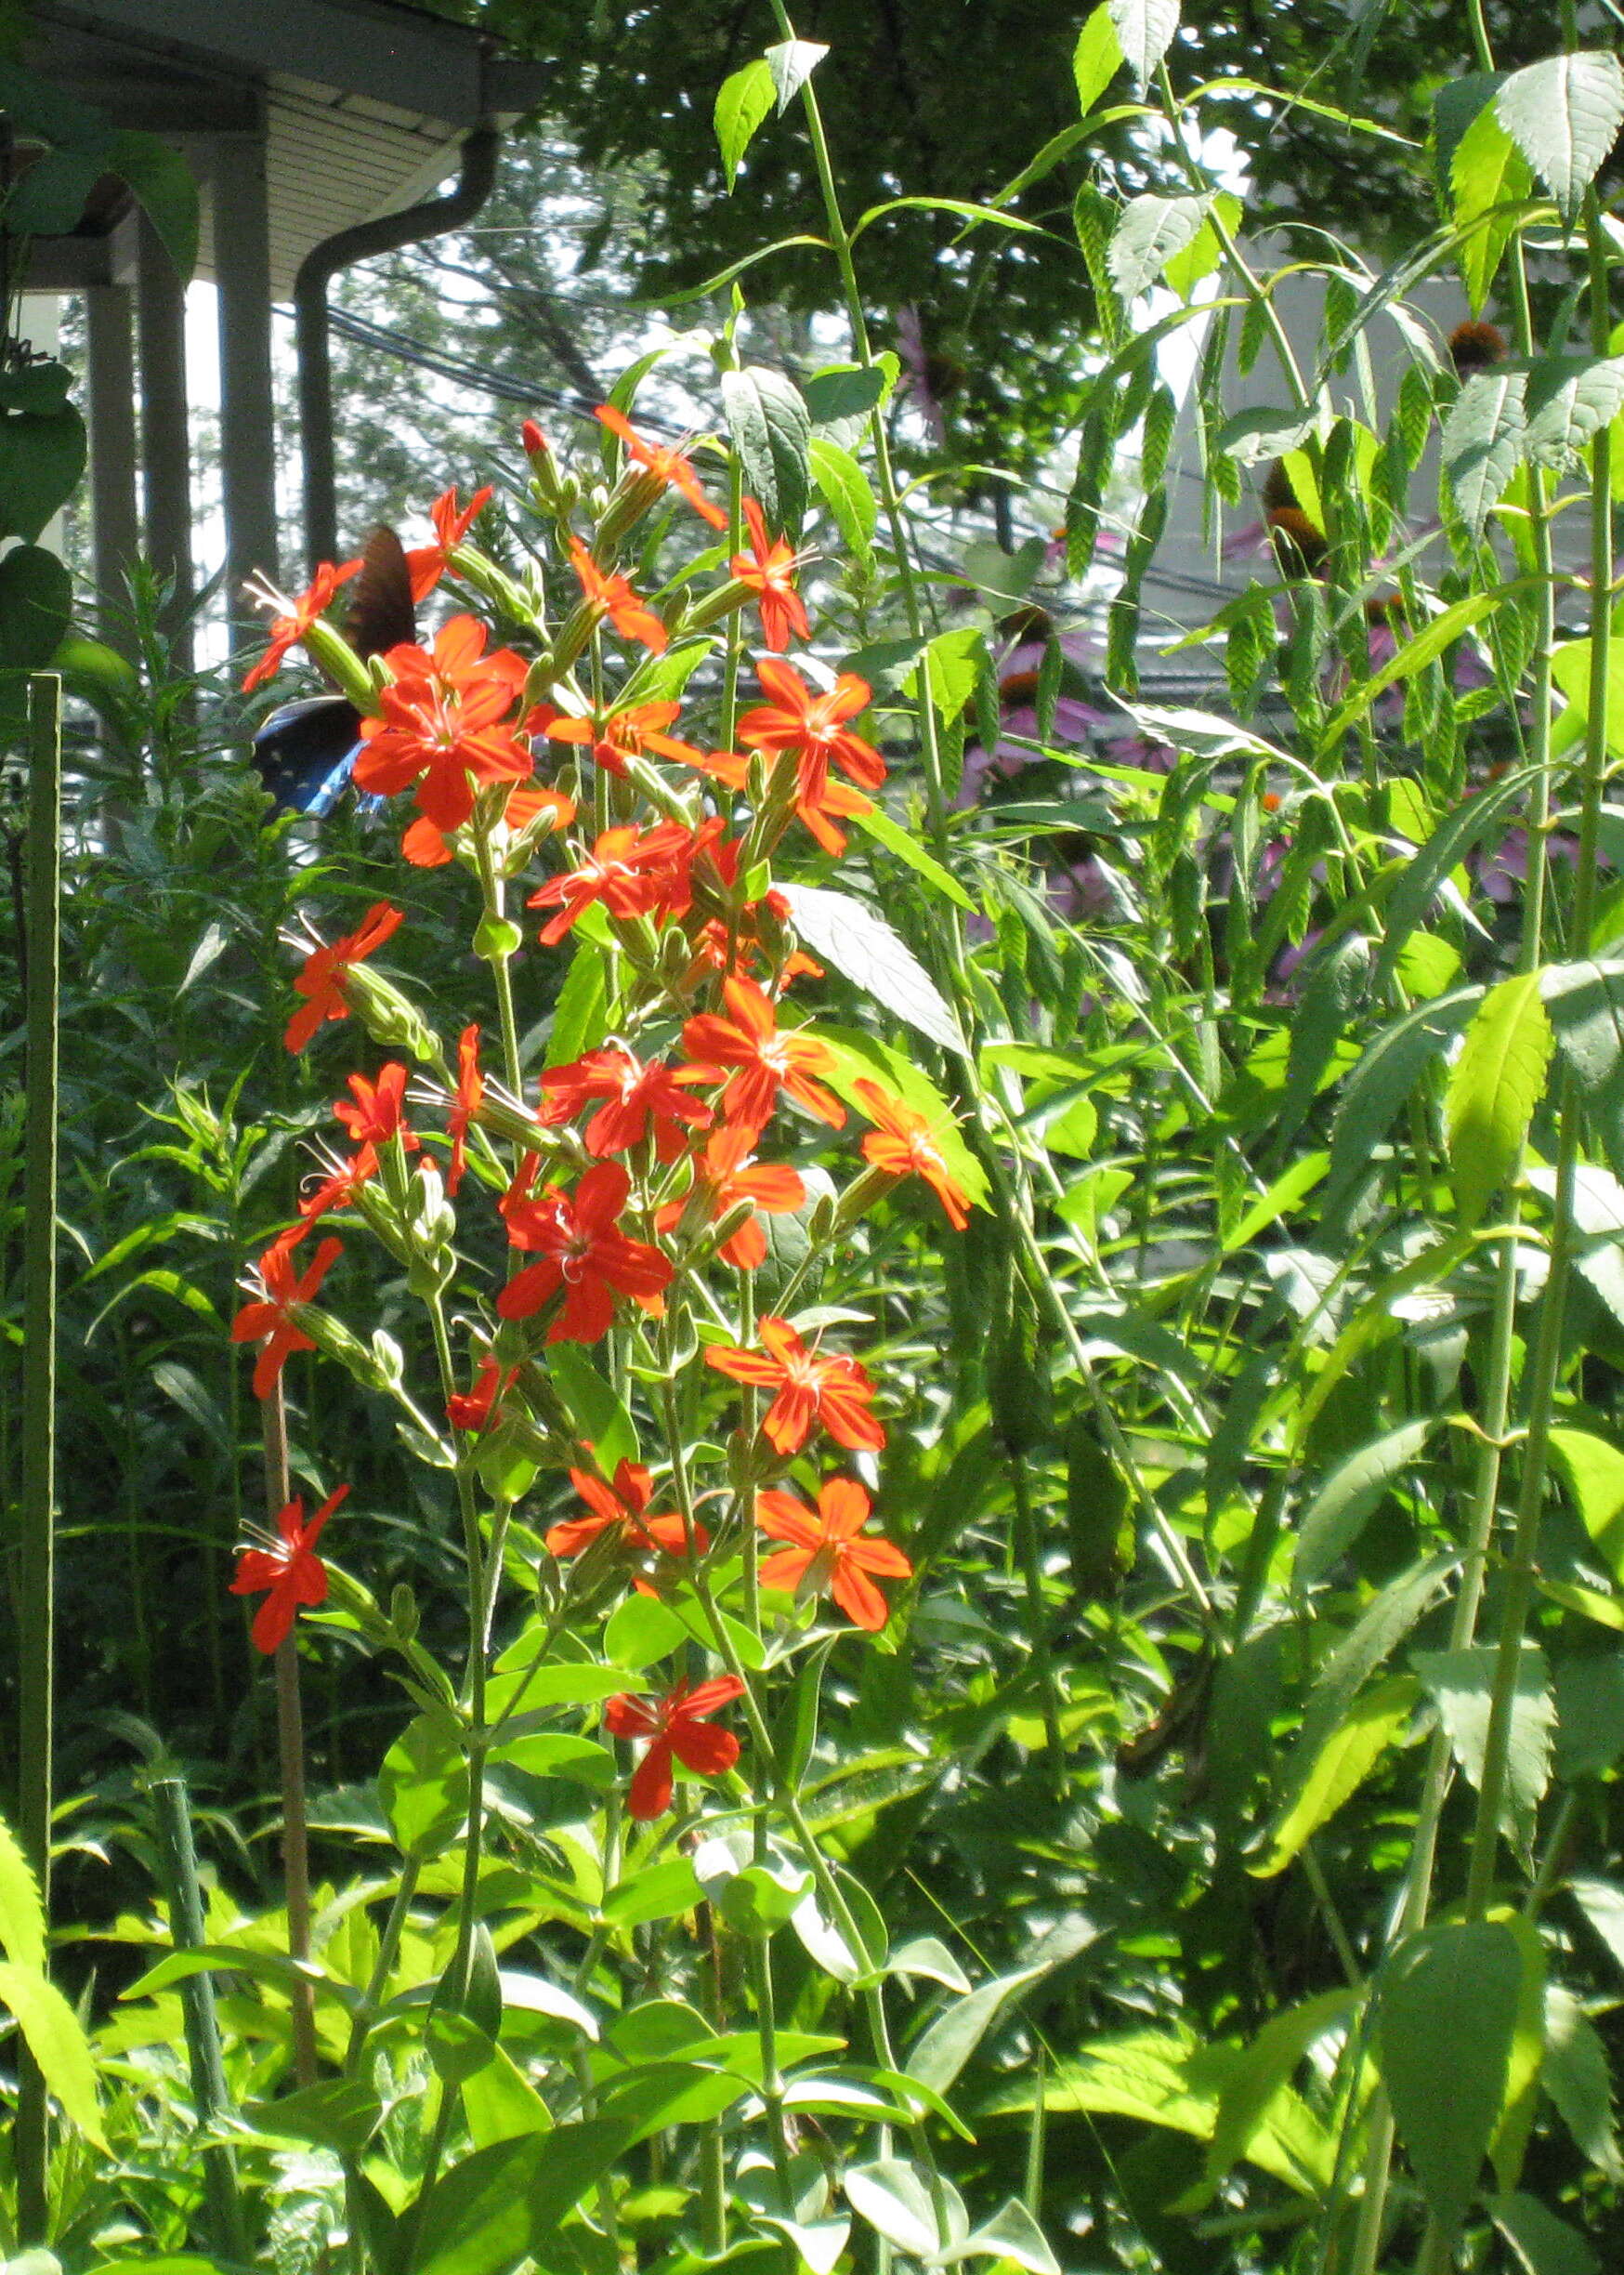 Image of royal catchfly